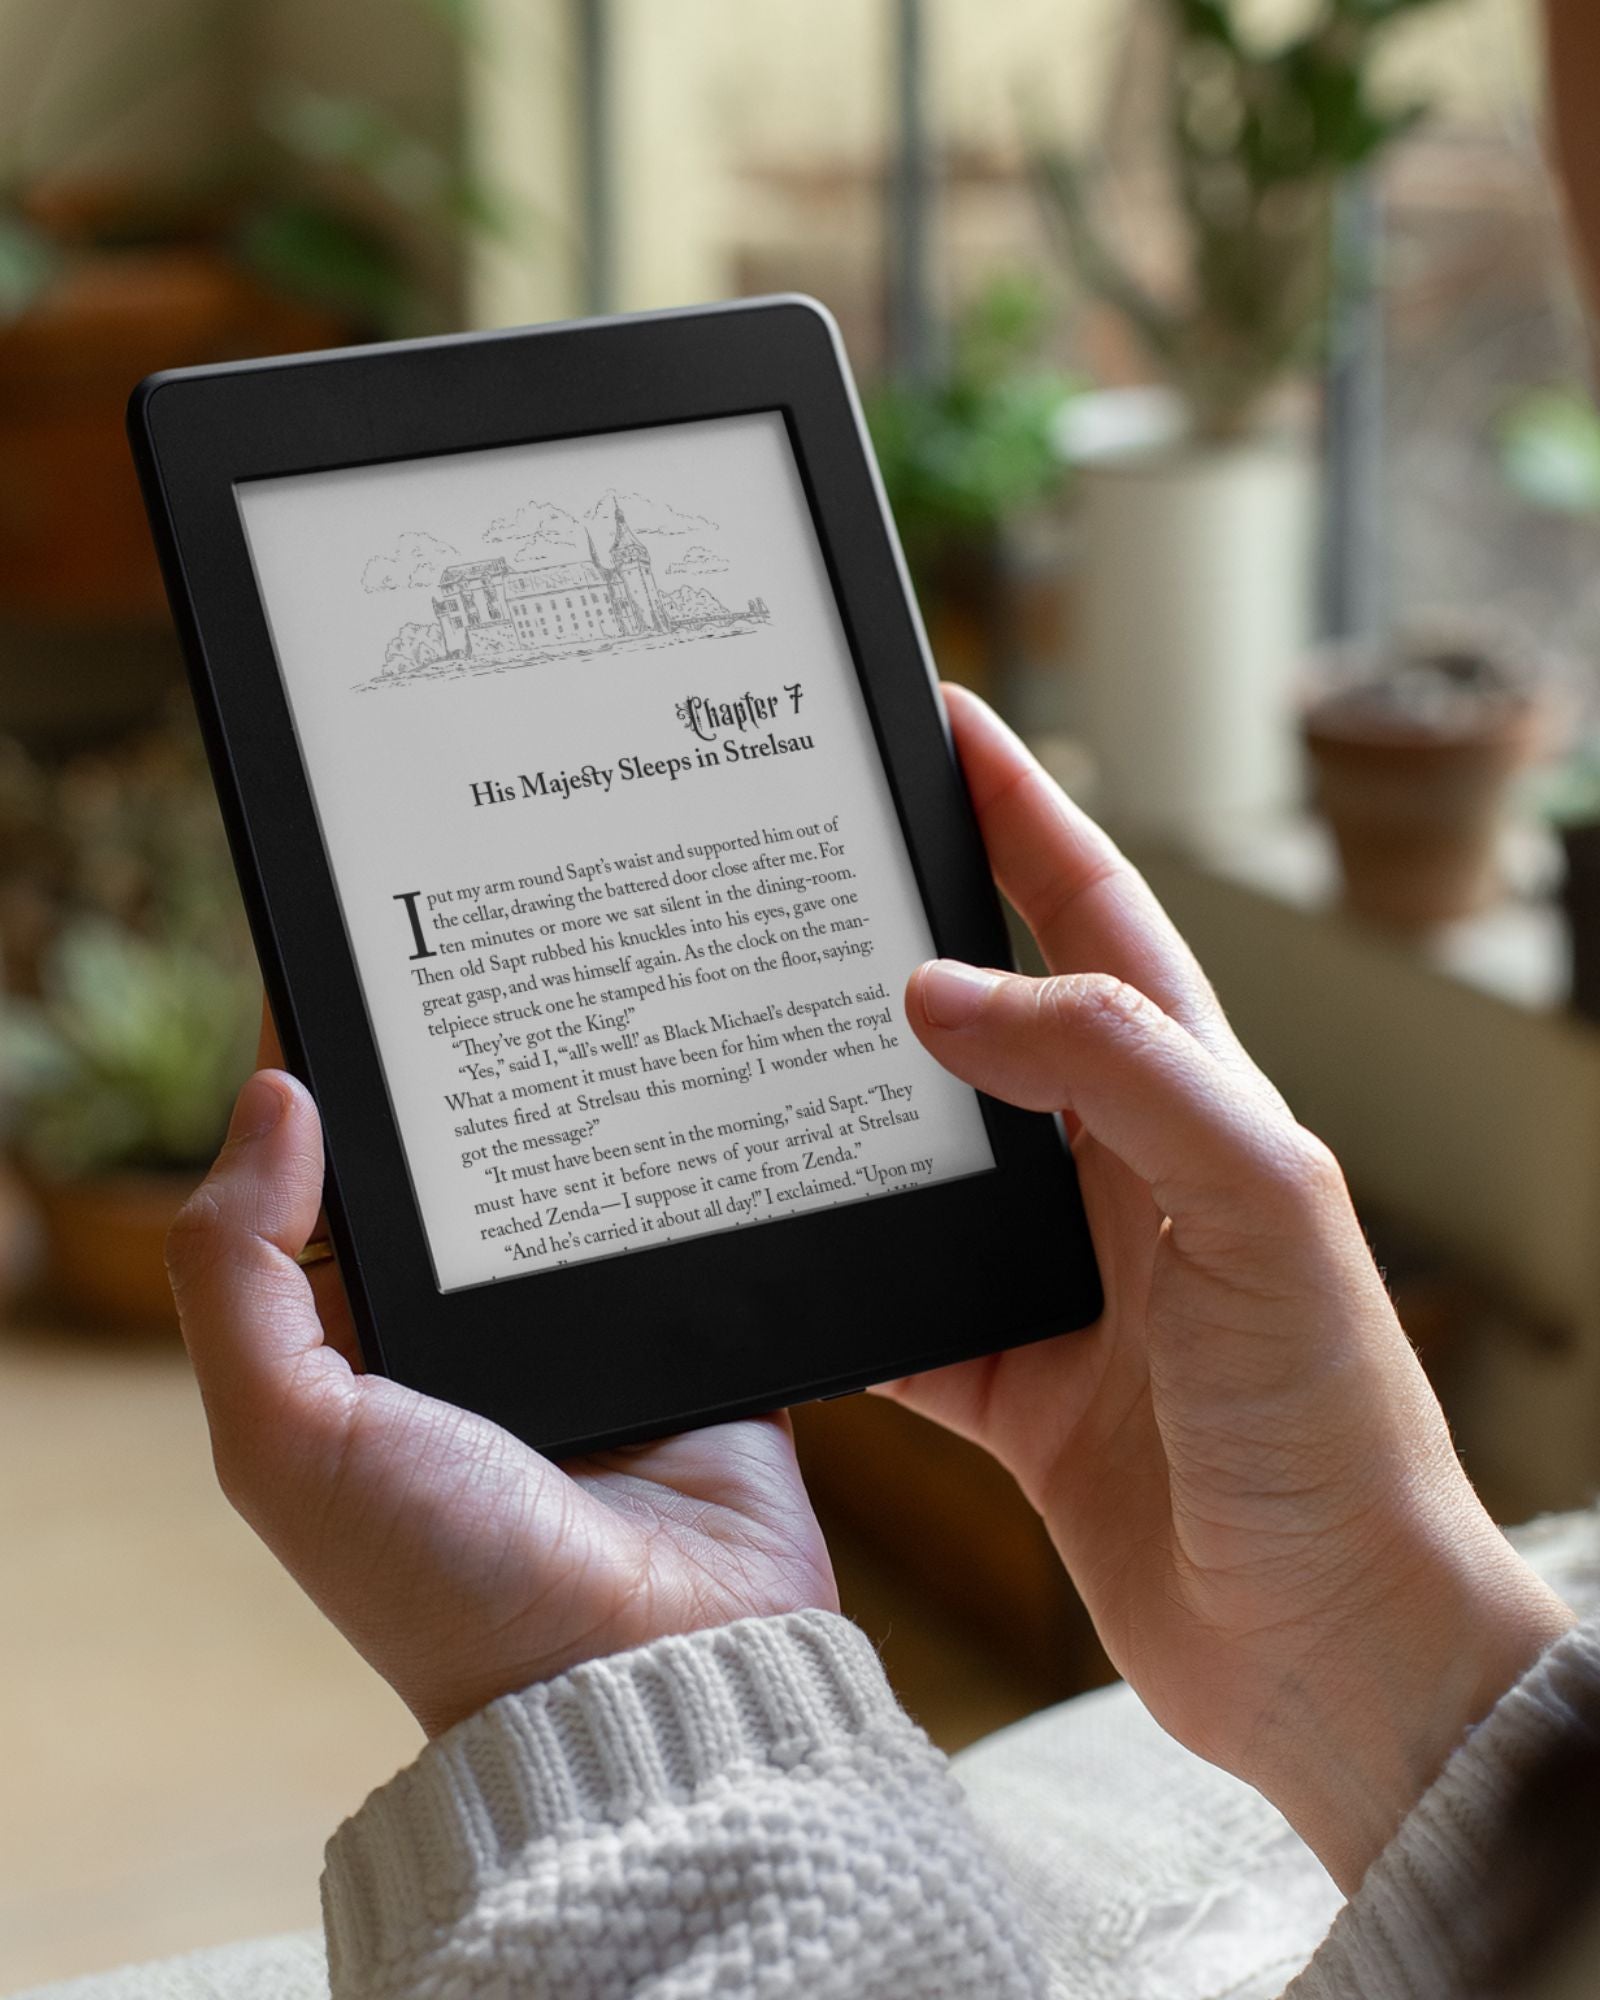 White hands gently hold a tablet which is turned to the illustrated heading for chapter 7 in the ebook of "The Prisoner of Zenda". The background of this picture is blurred plants on the floor and on a windowsill. 